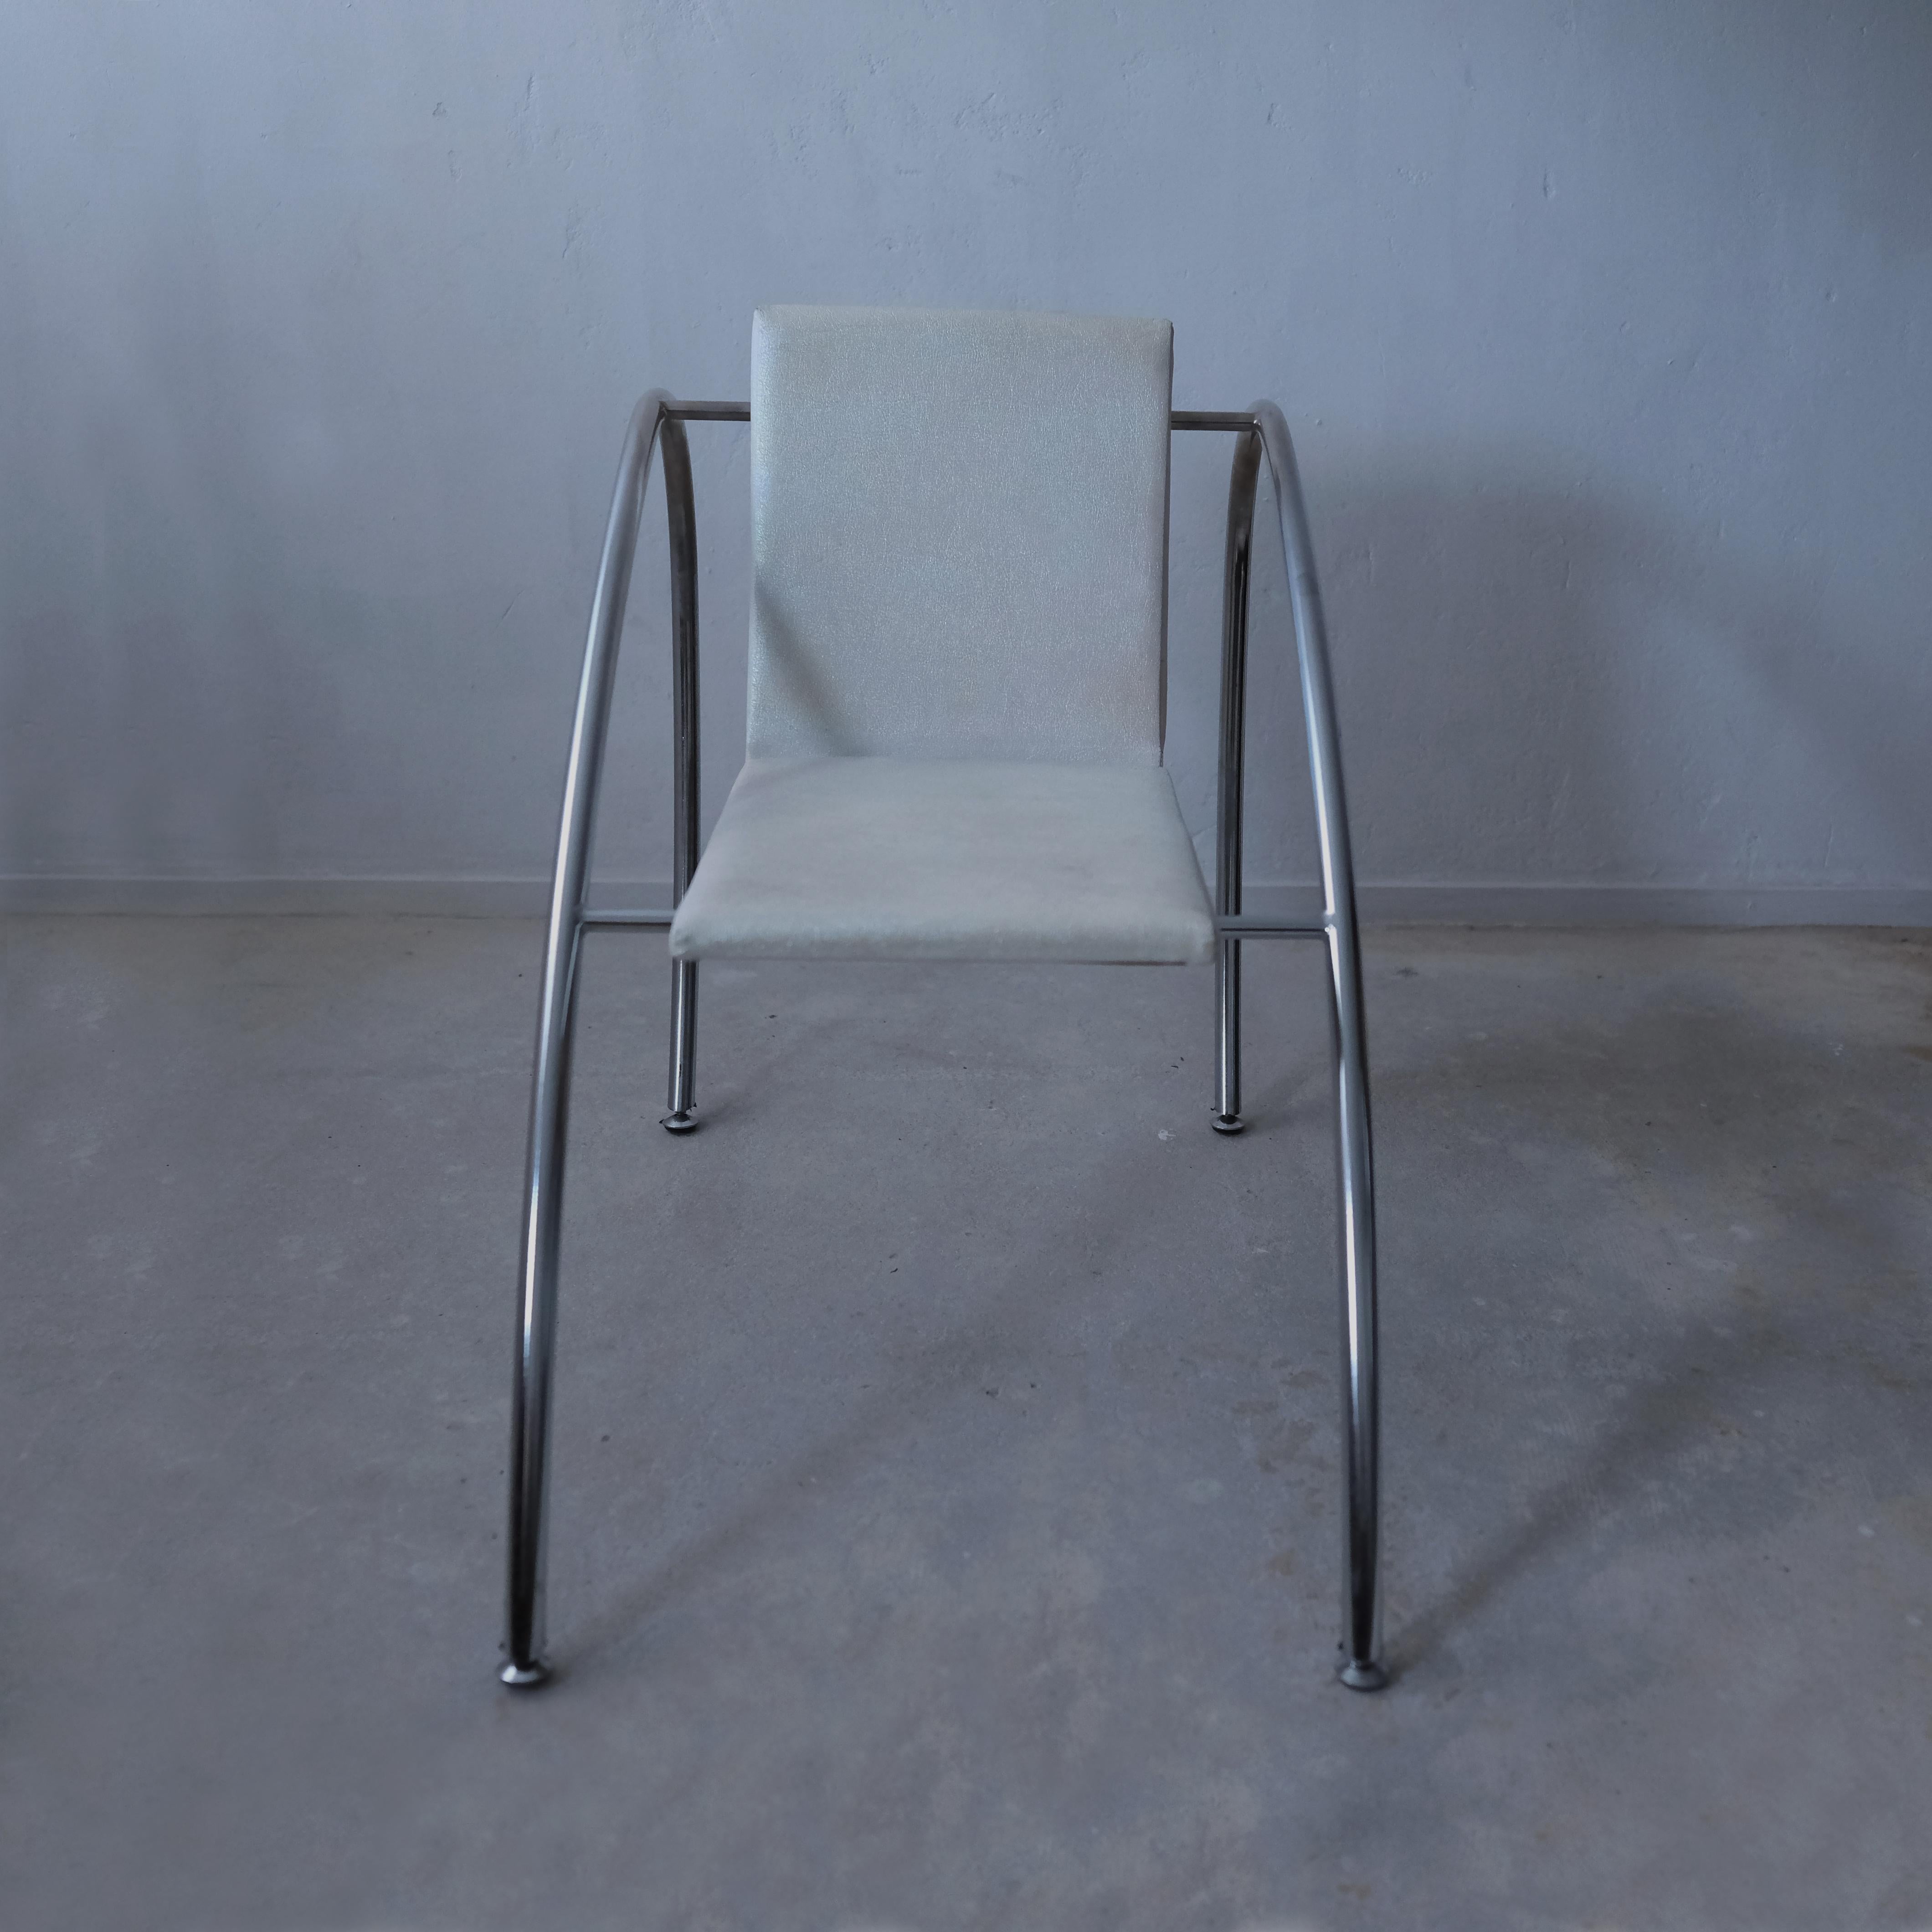 Alain Domingo and François Scali  pair of Moreno - Marini Chairs For Sale 3